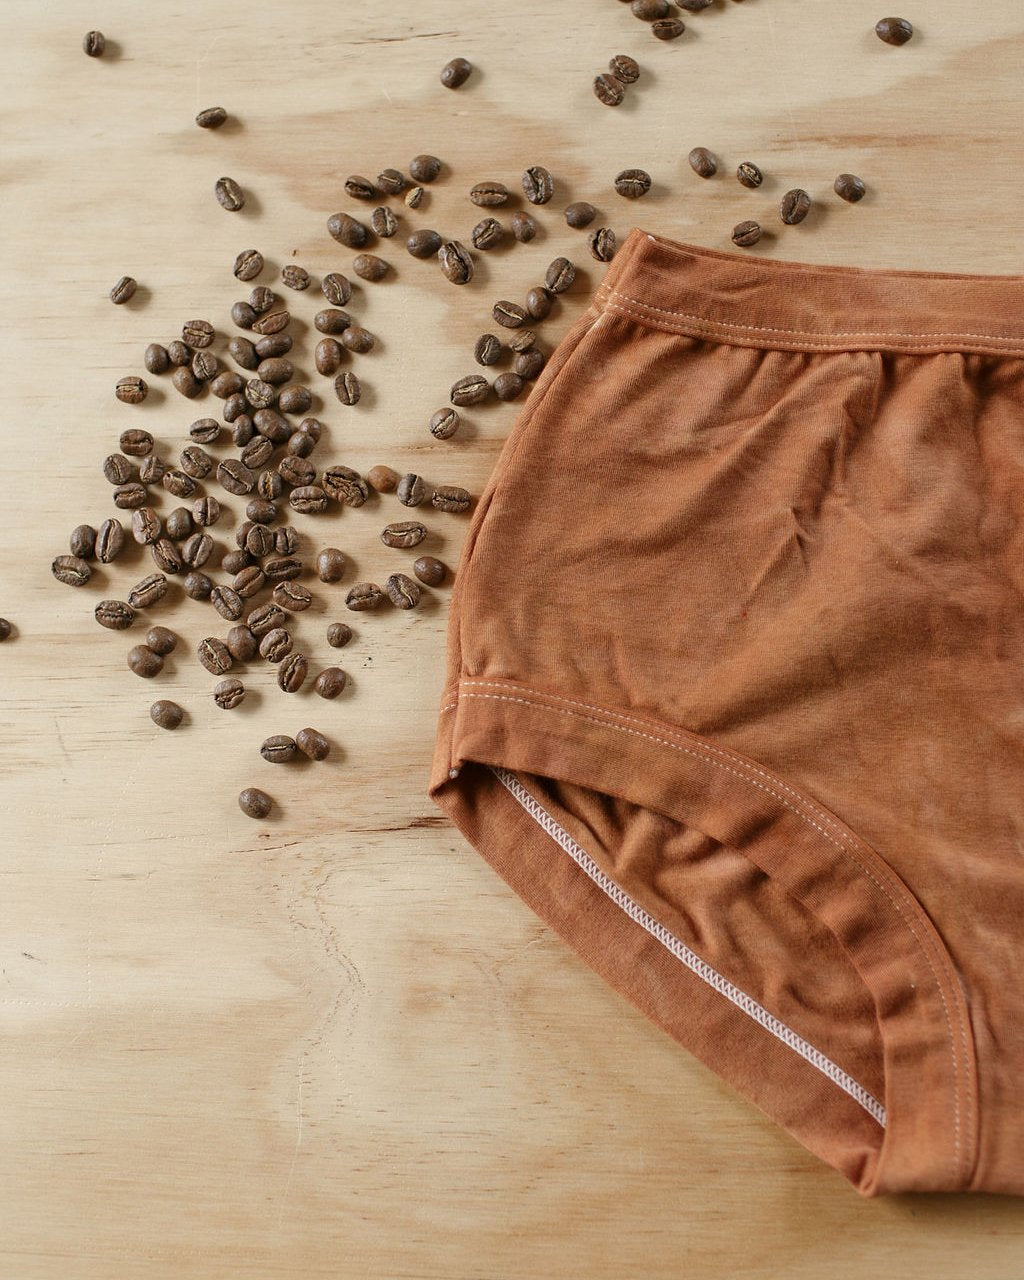 Flat lay of Thunderpants Organic Cotton Original underwear in hand dyed Espresso color with coffee beans around.